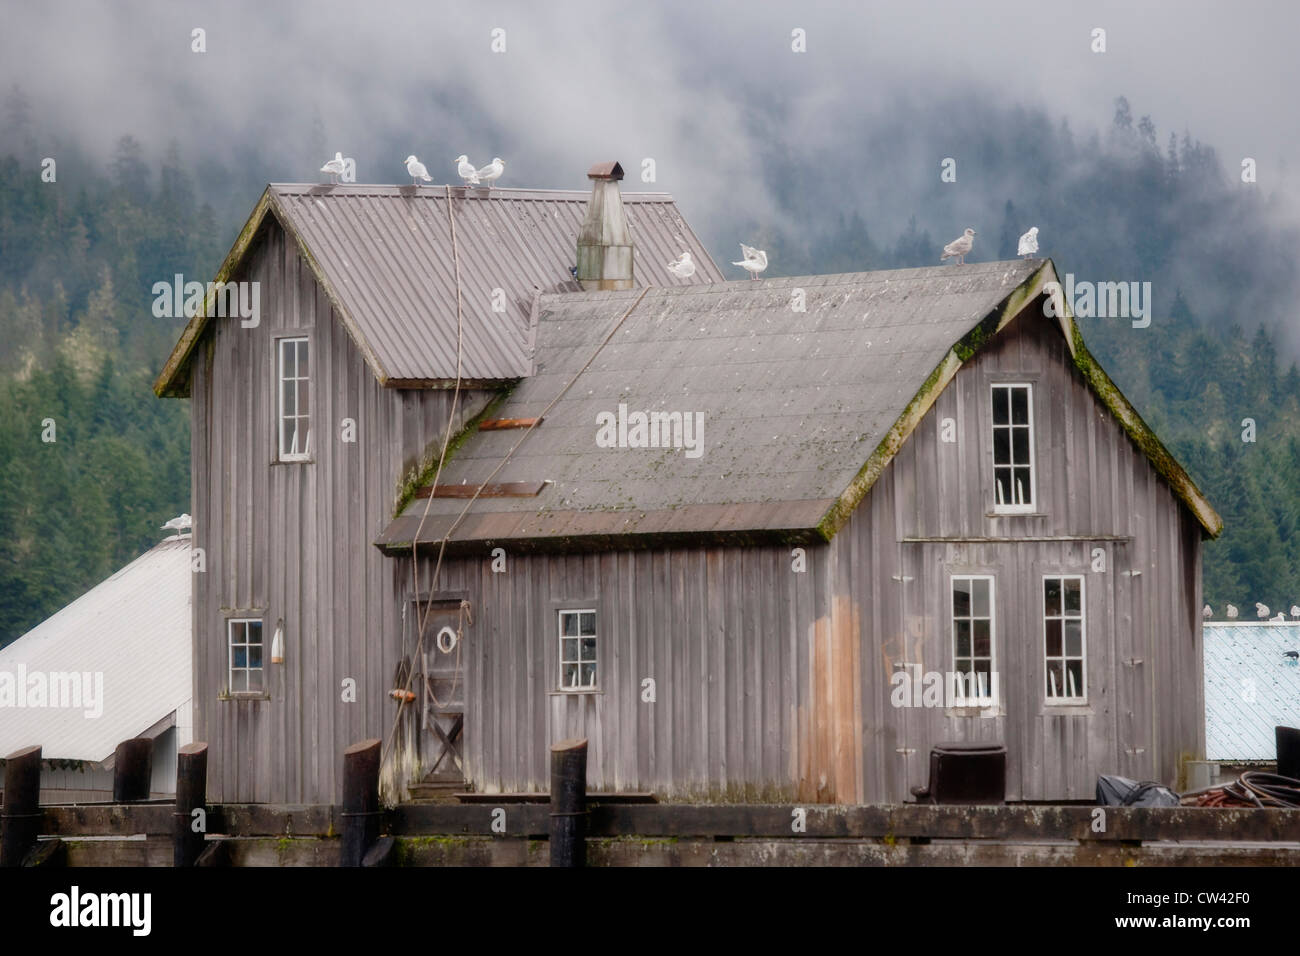 Seagulls perching on the roof of a building, Petersburg, Alaska, USA Stock Photo